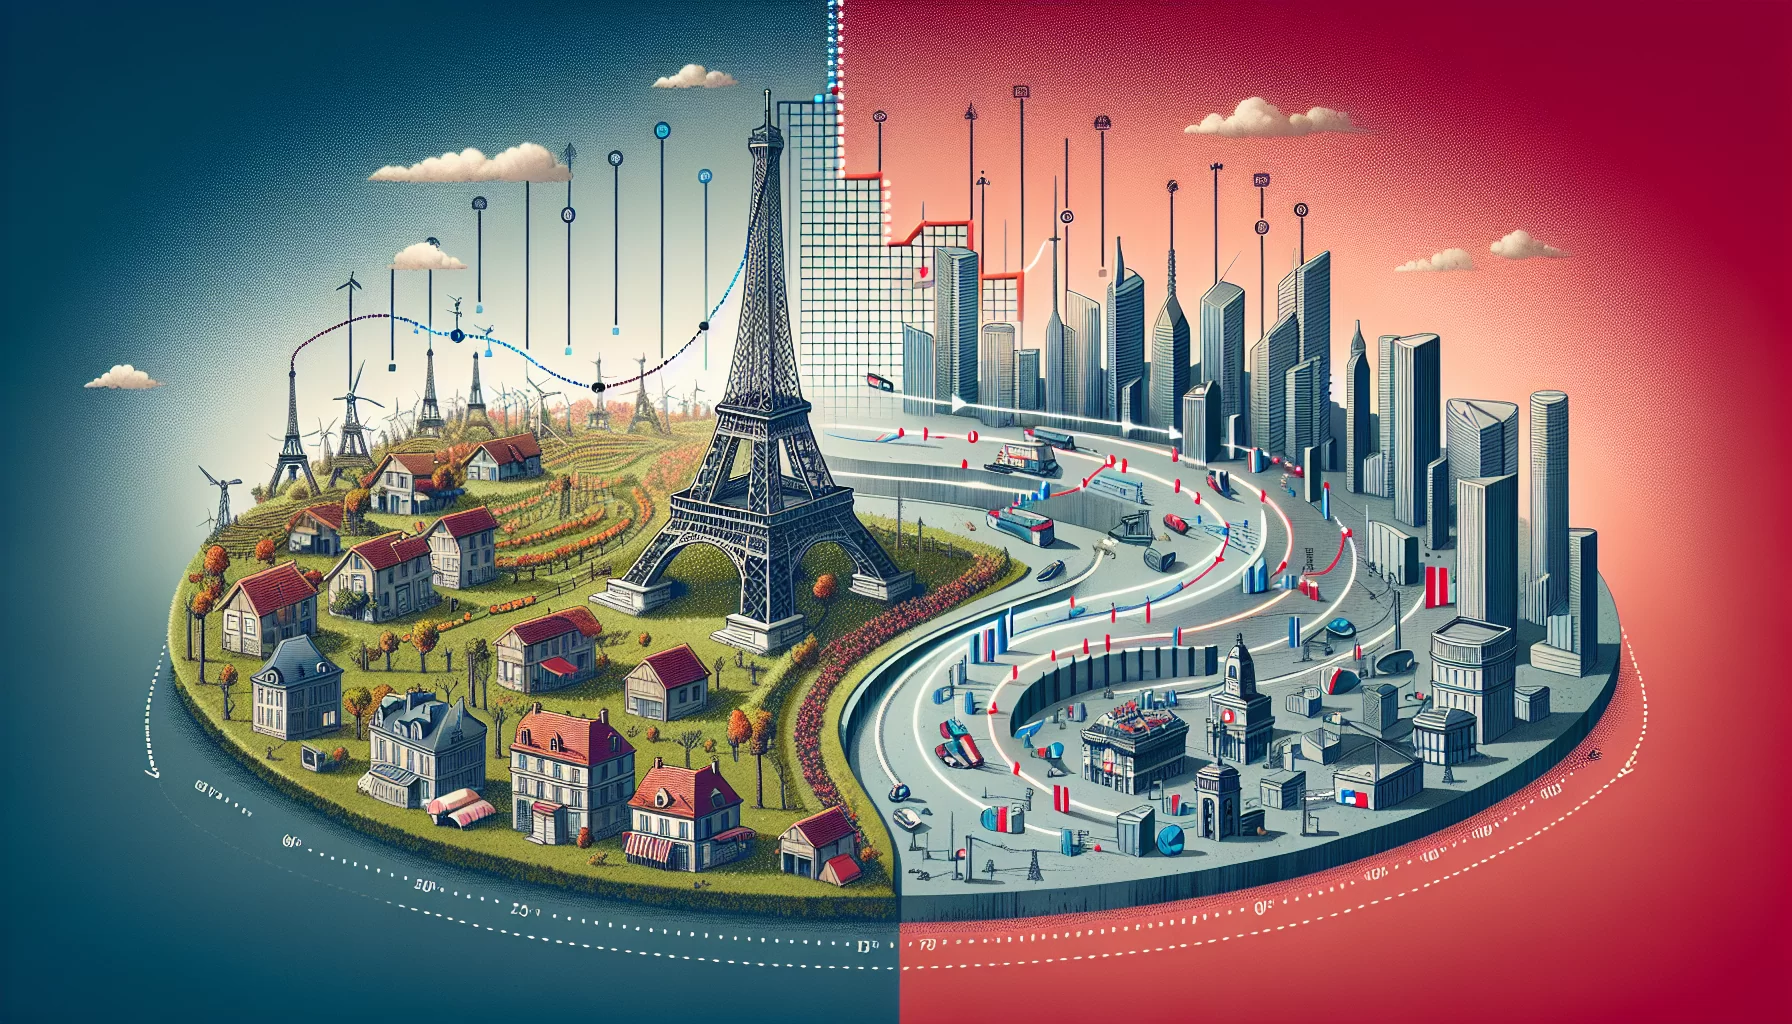 Elections and economics: tracing the shifts in France's economic landscape